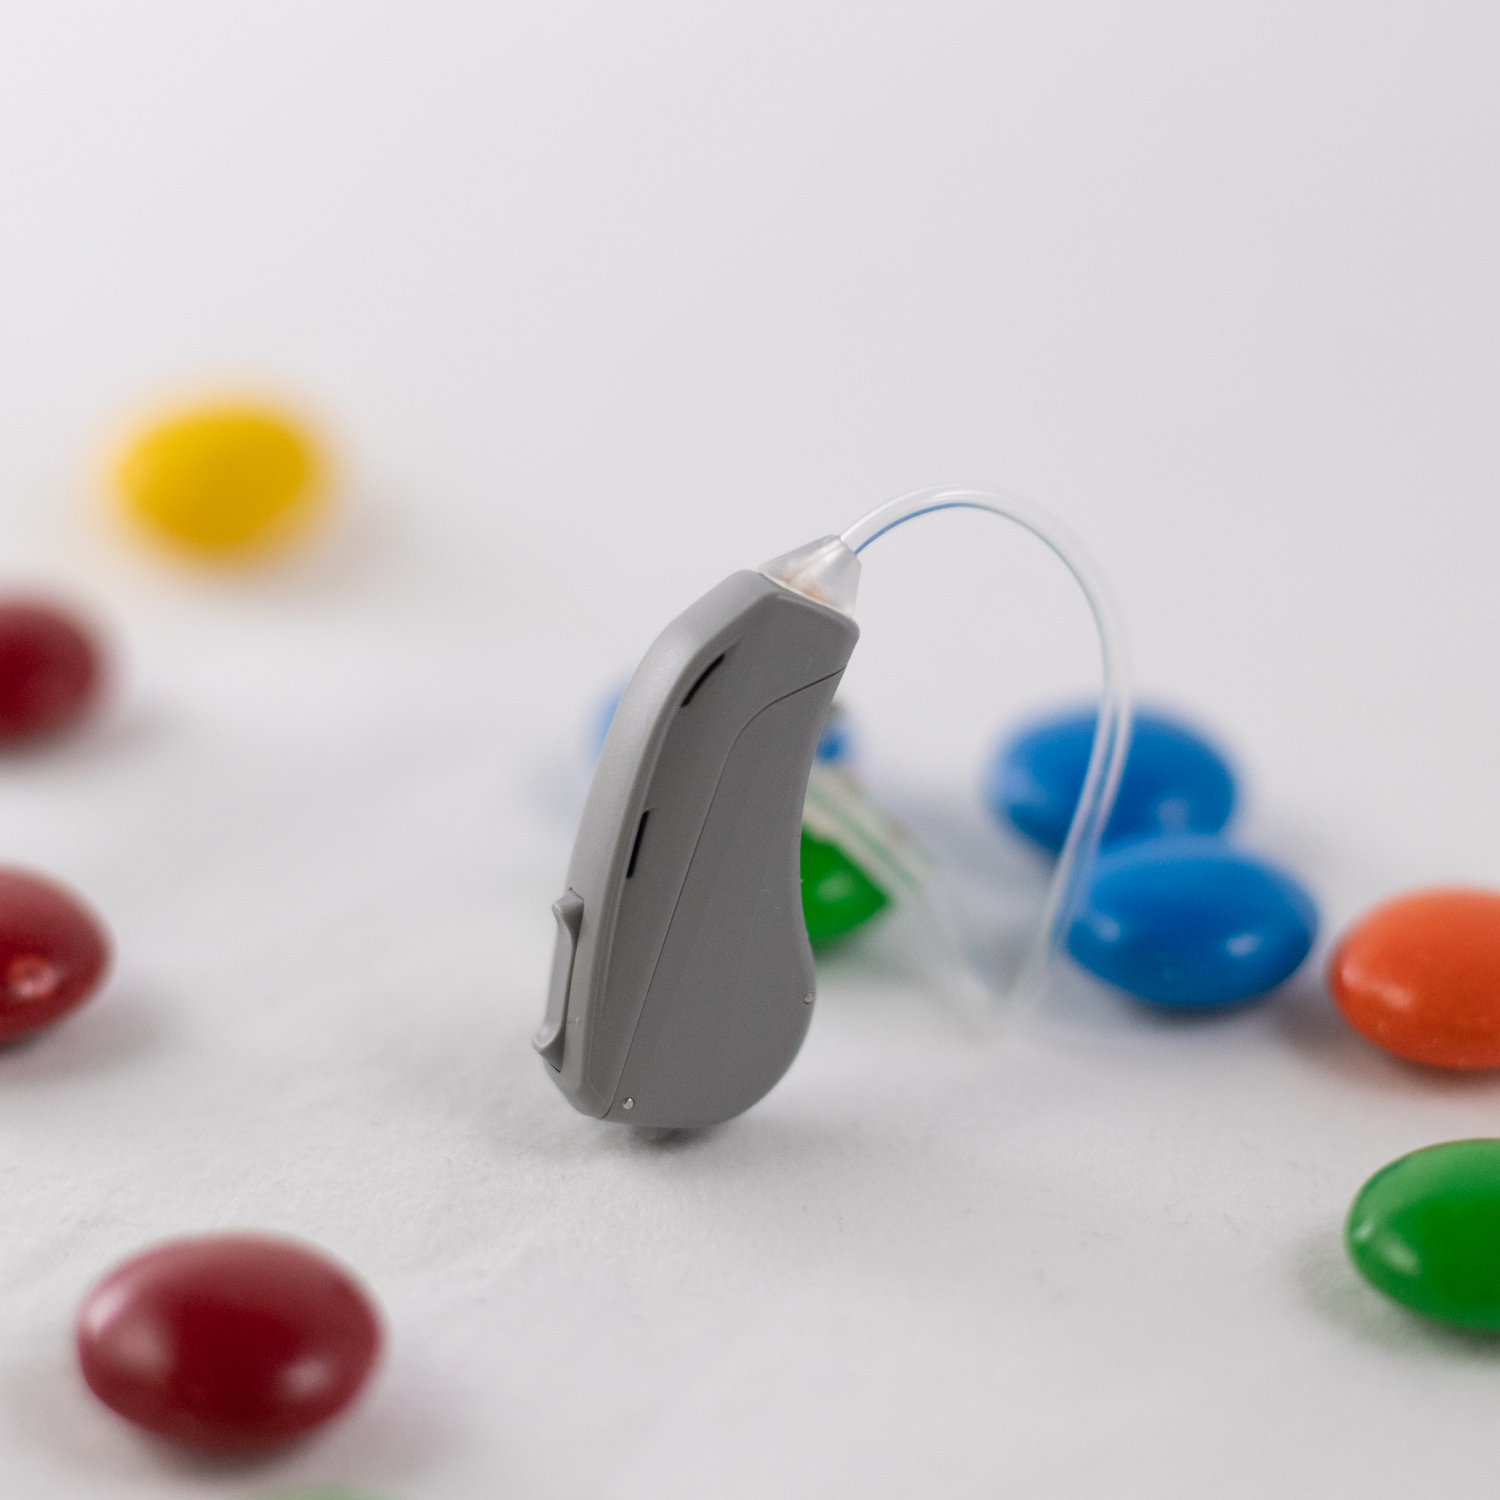 A Warbler Series 3 Hearing Aid on a table, surrounded by small colourful candies to show of how small the hearing aid is